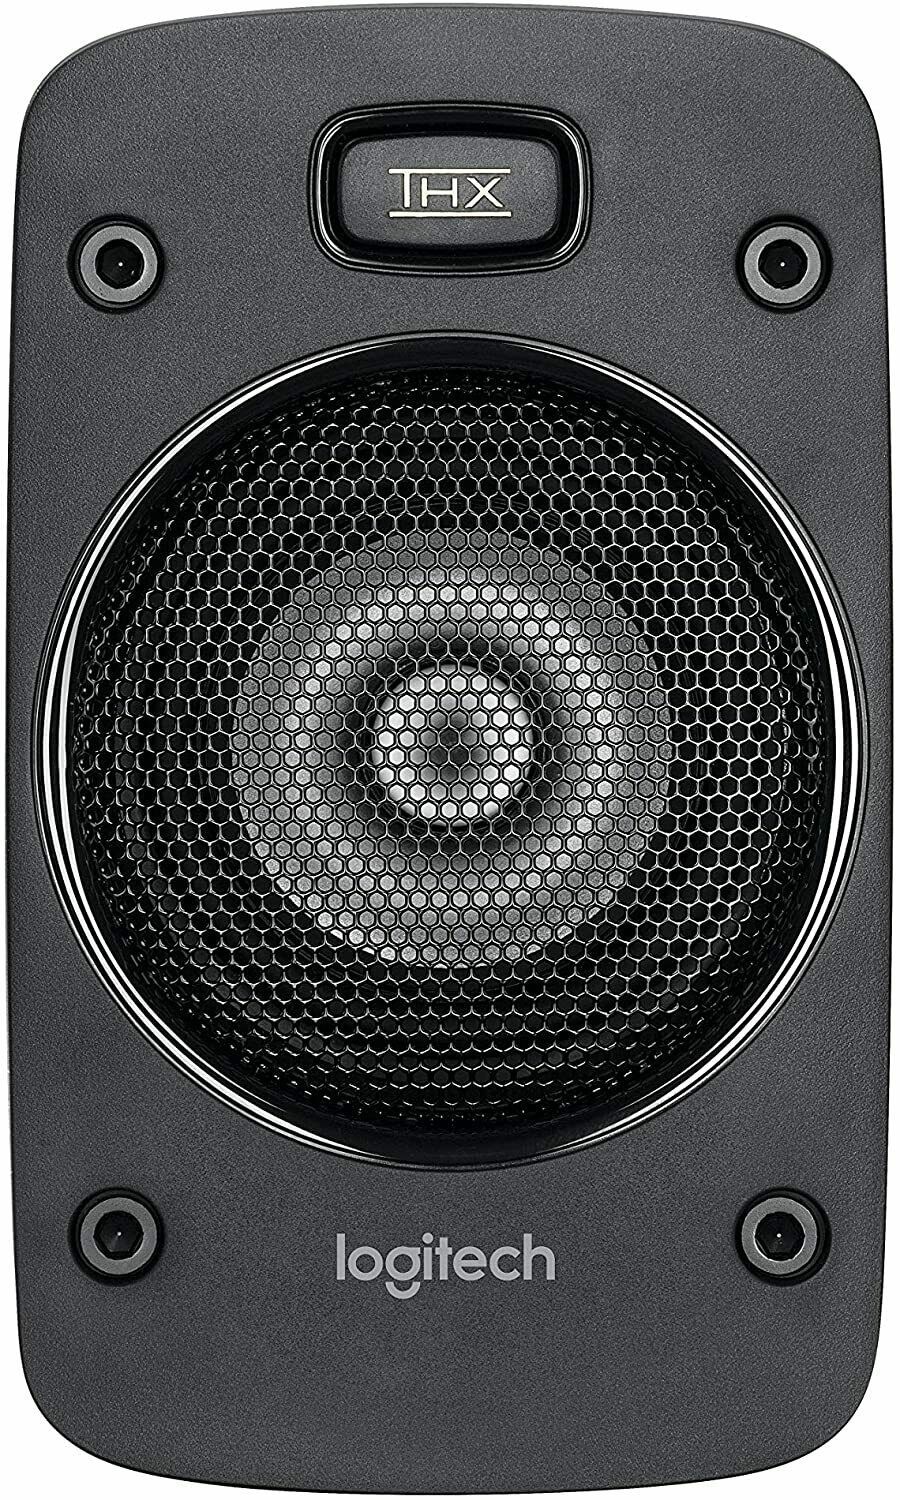 Use subwoofer Logitech Z906 and connect with sub out from Edifier g2000